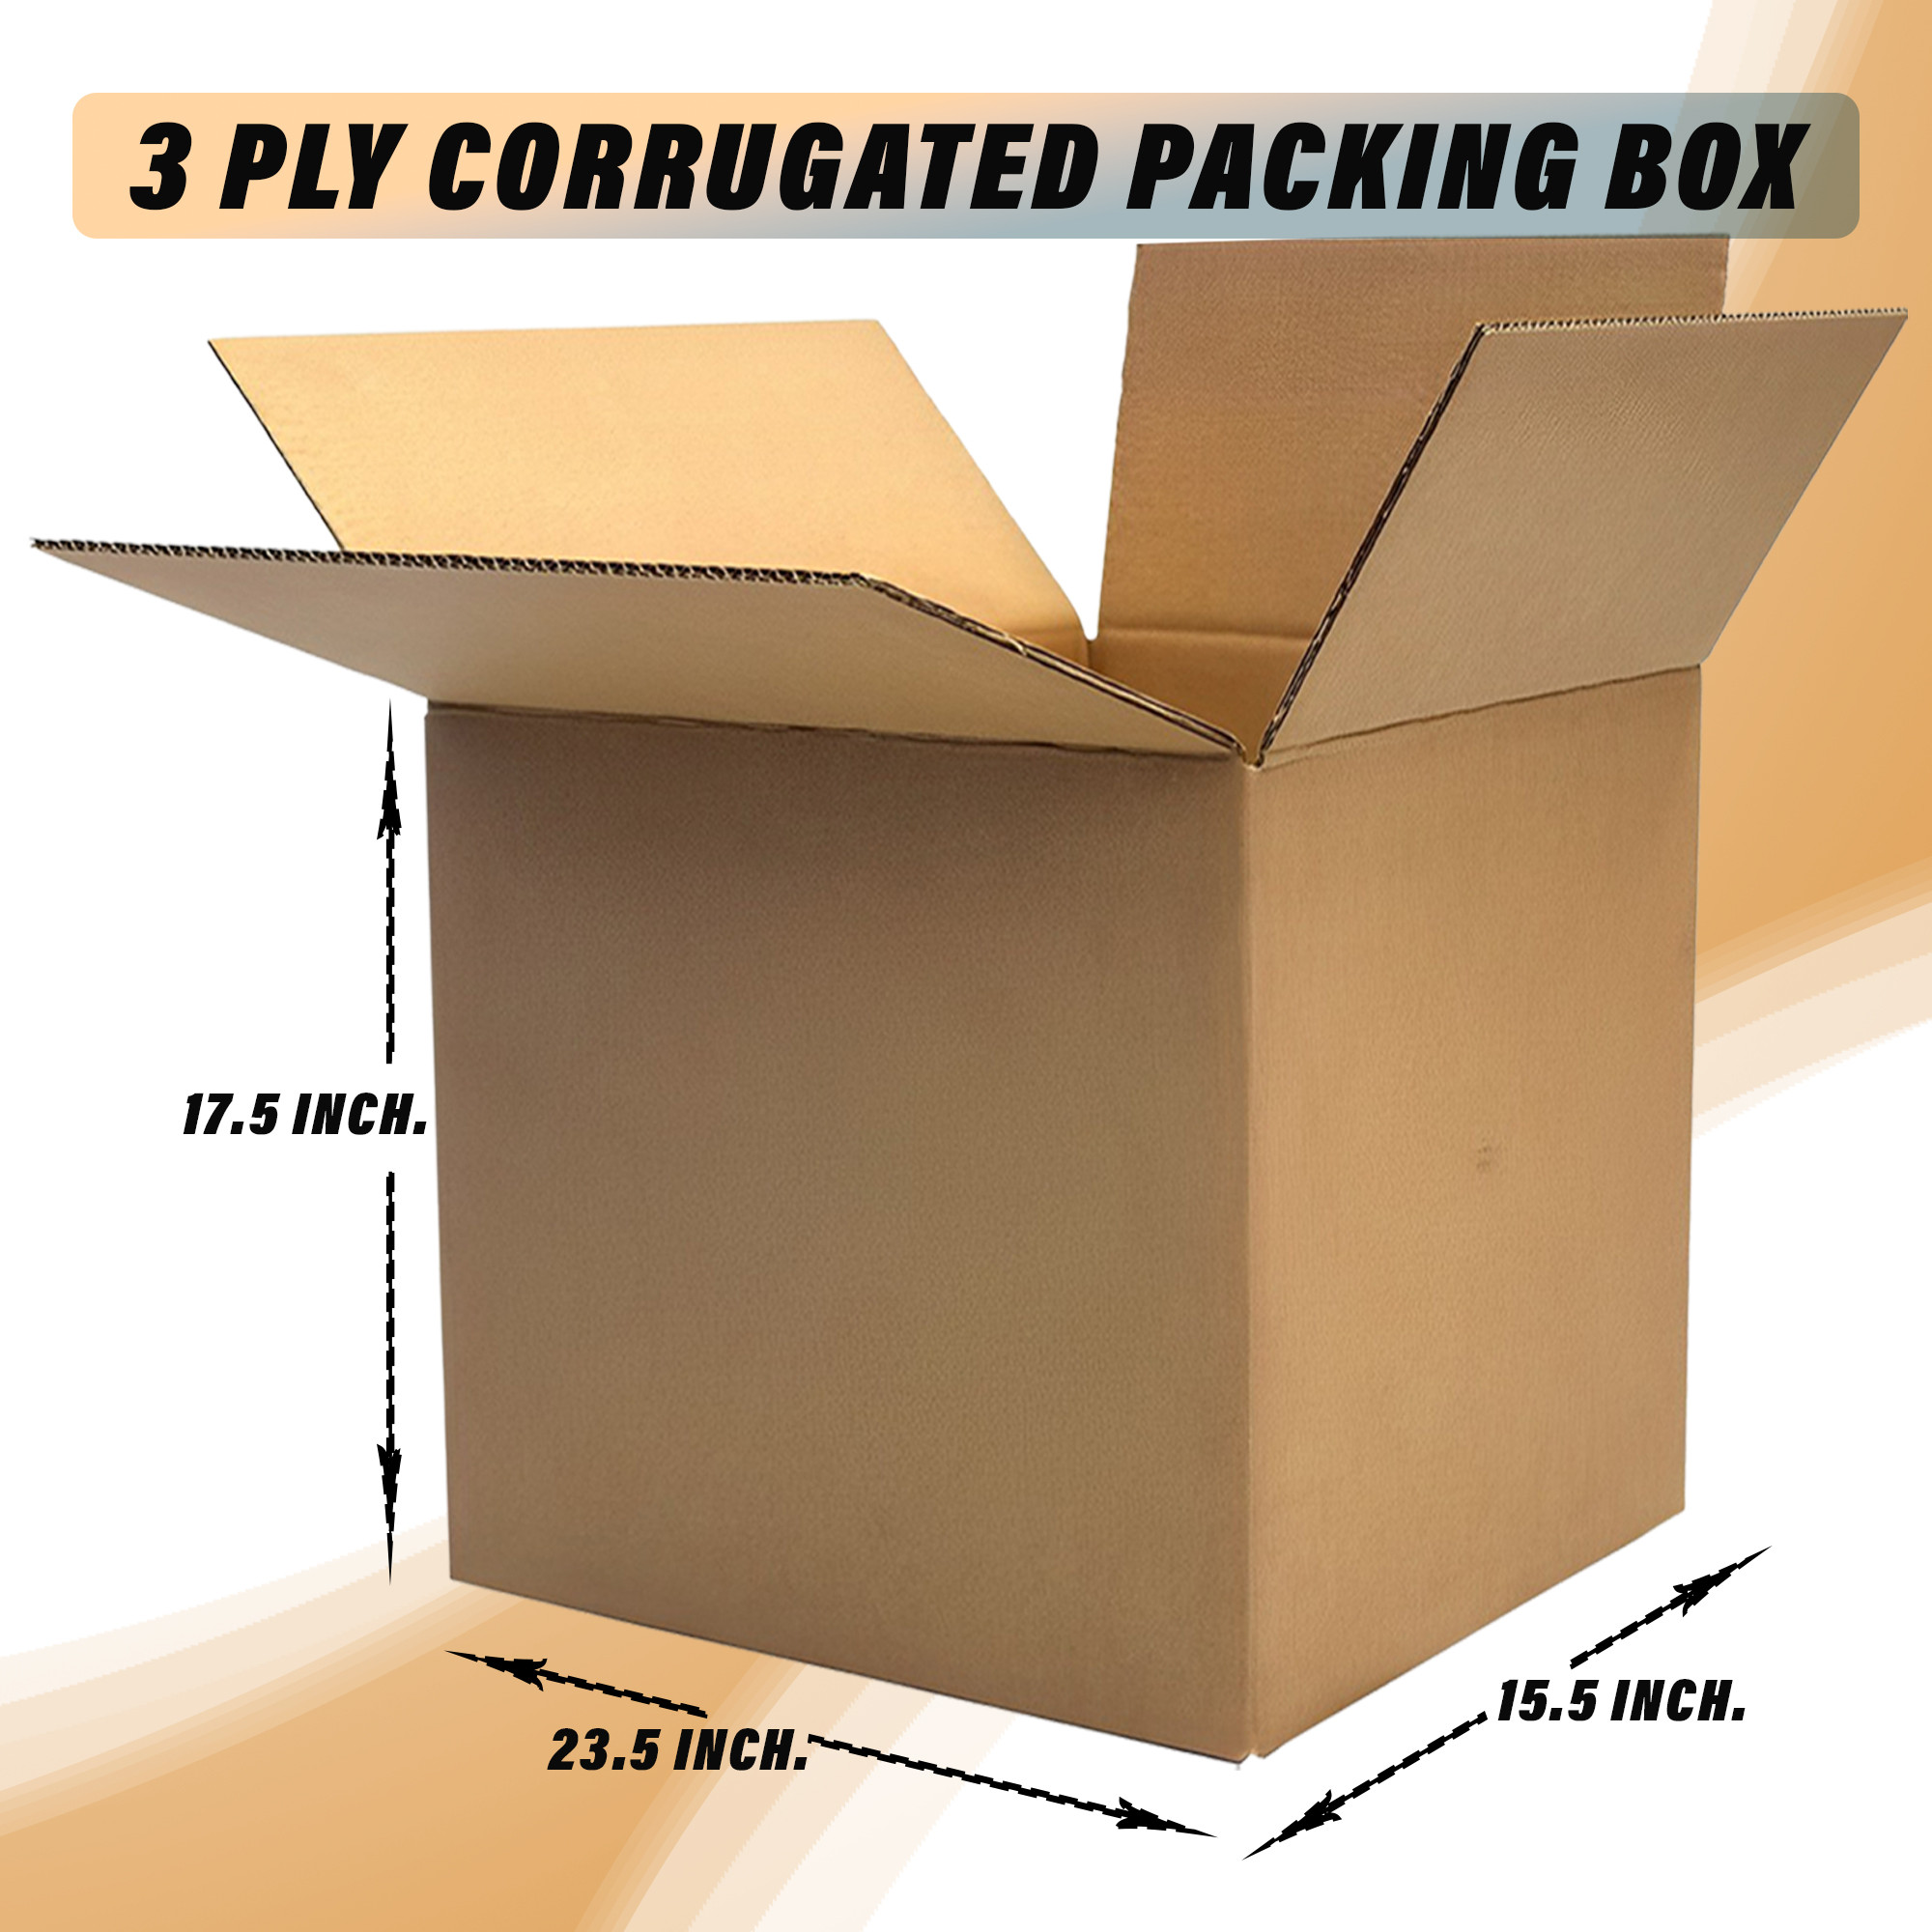 Kuber Industries Corrugated Box | 3 Ply Corrugated Packing Box | Corrugated for Shipping | Corrugated for Courier & Goods Transportation | L 23.5 x W 15.5 x H 17.5 Inch | Brown